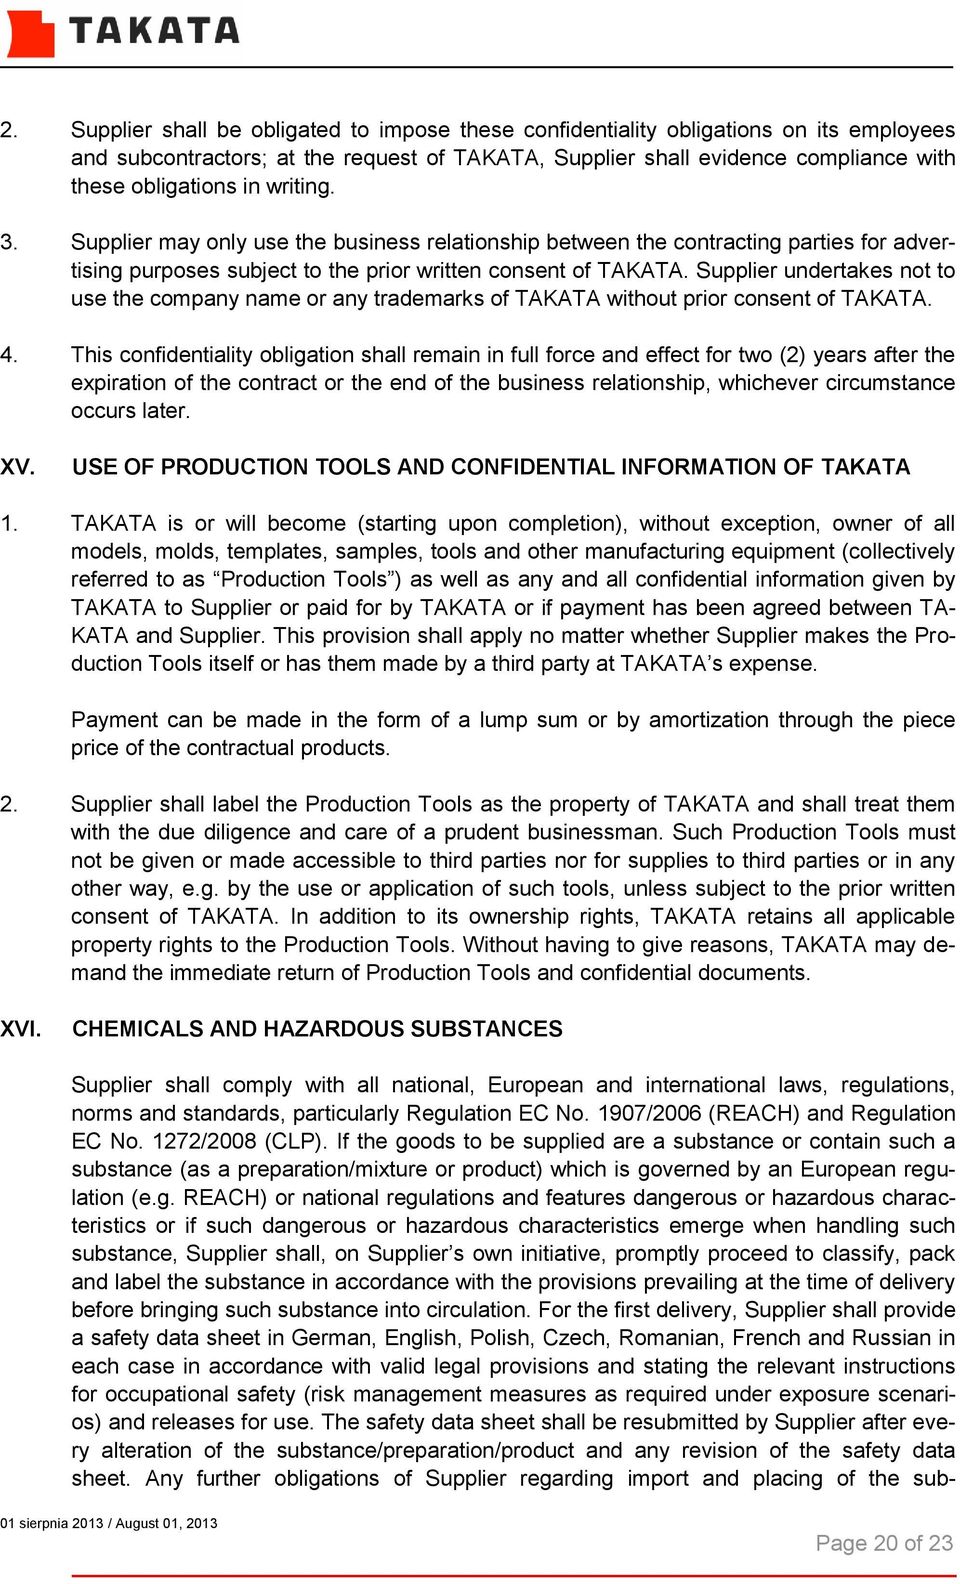 Supplier undertakes not to use the company name or any trademarks of TAKATA without prior consent of TAKATA. 4.